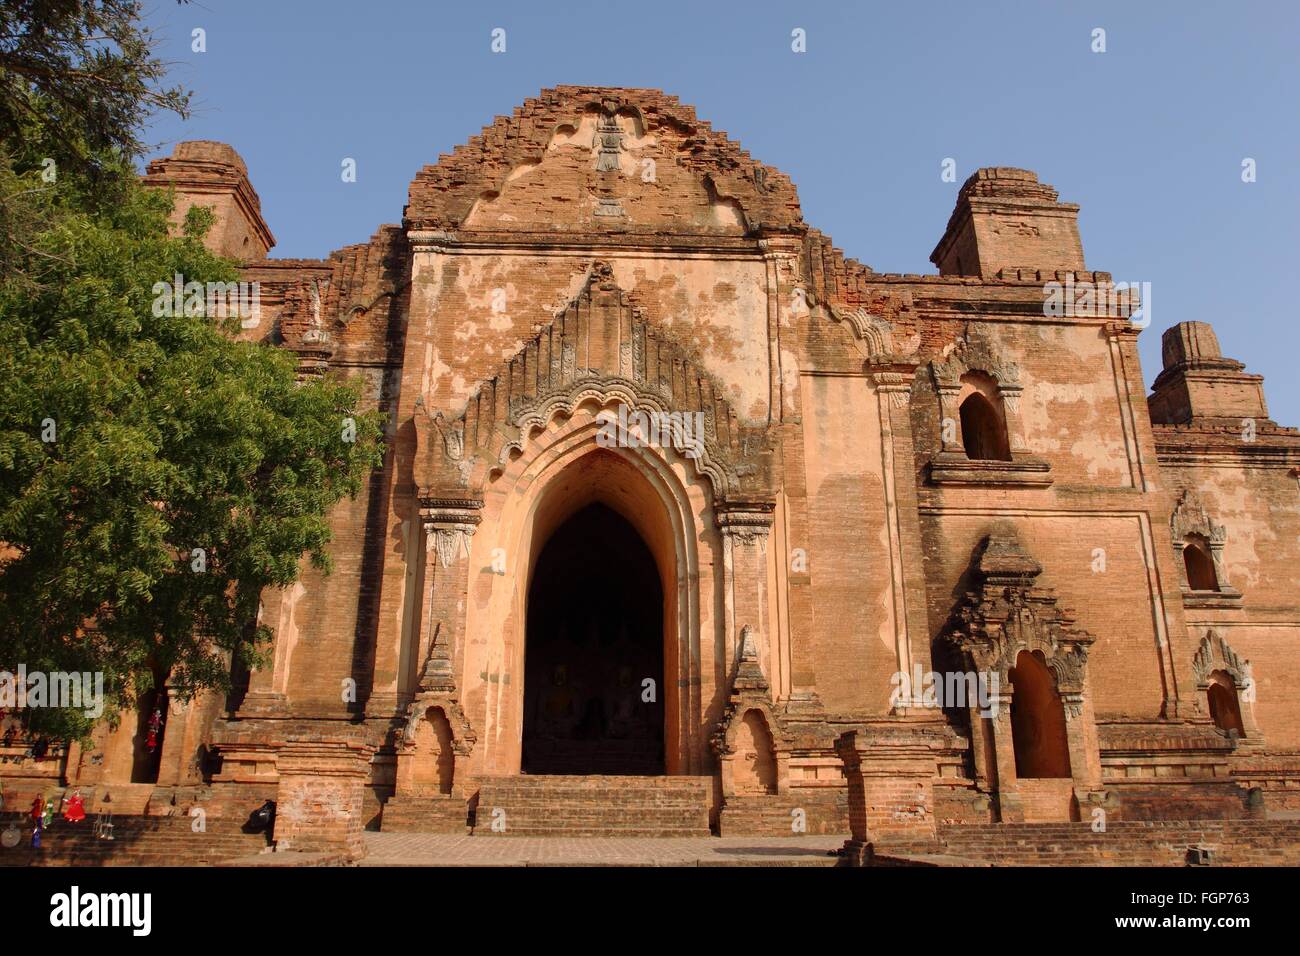 Sulamani, old Buddhist temples and pagodas in Bagan, Myanmar Stock Photo